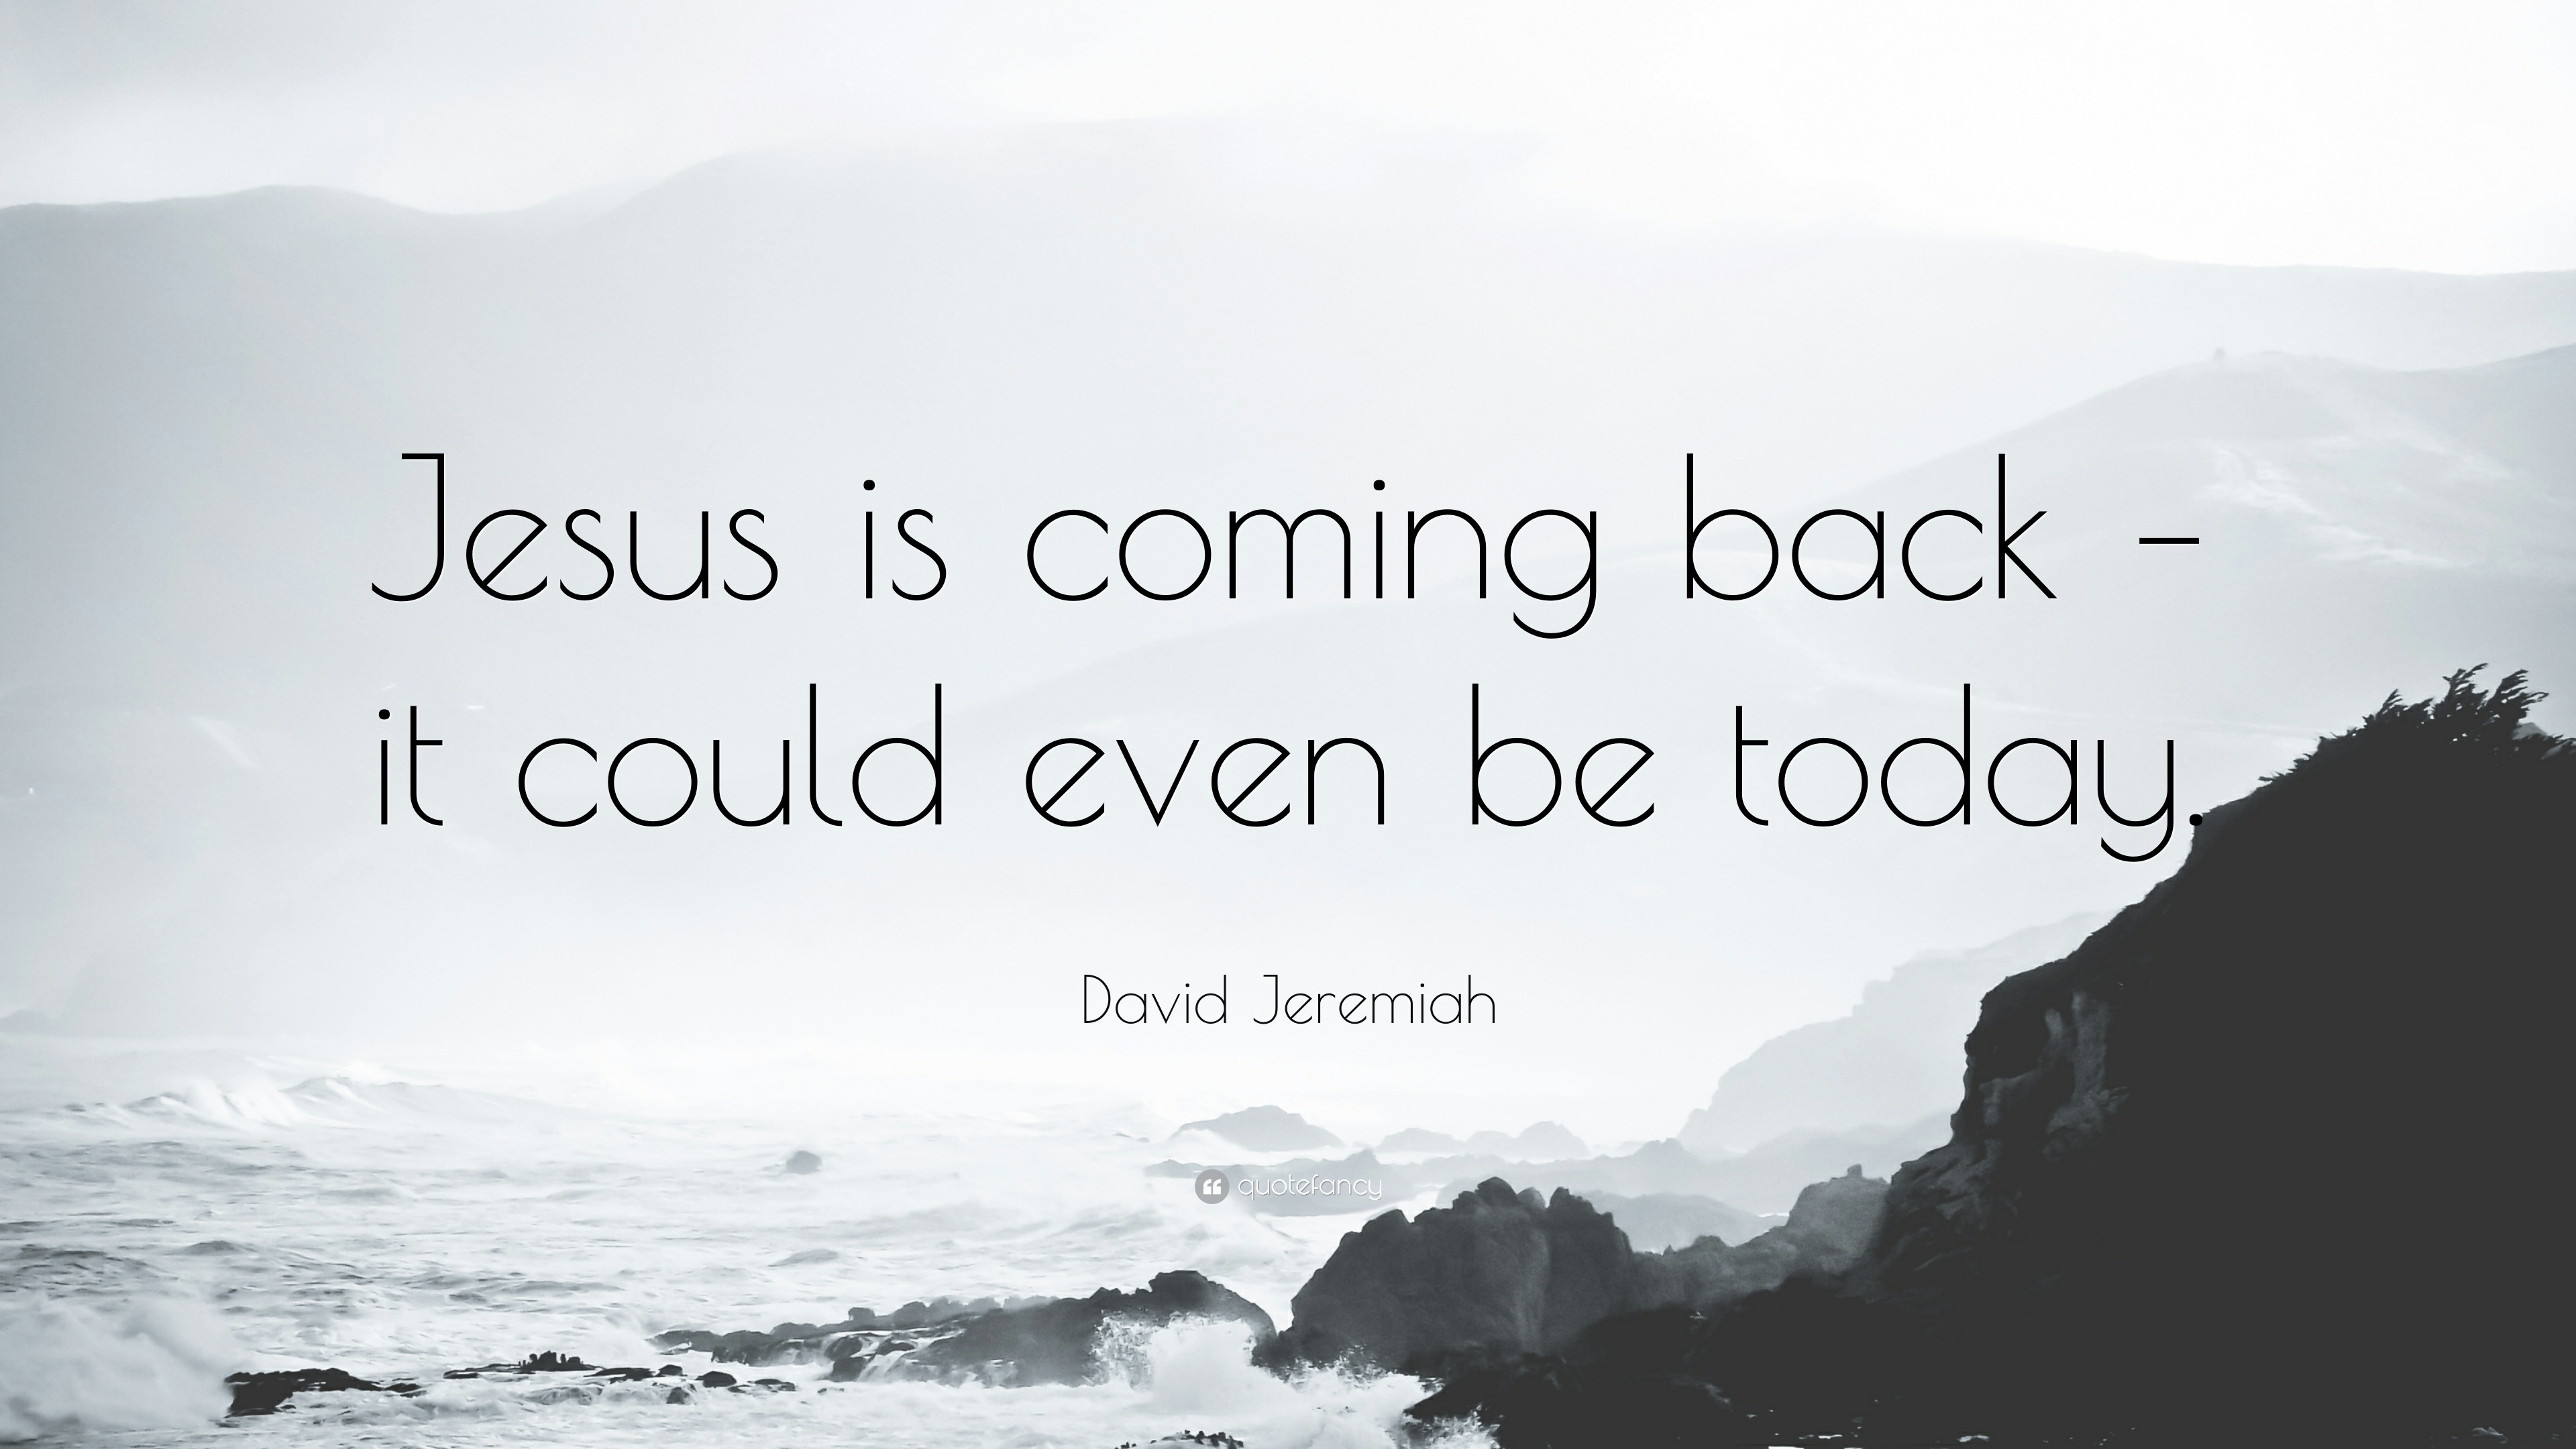 David Jeremiah Quote “Jesus is coming back it could even be today.”